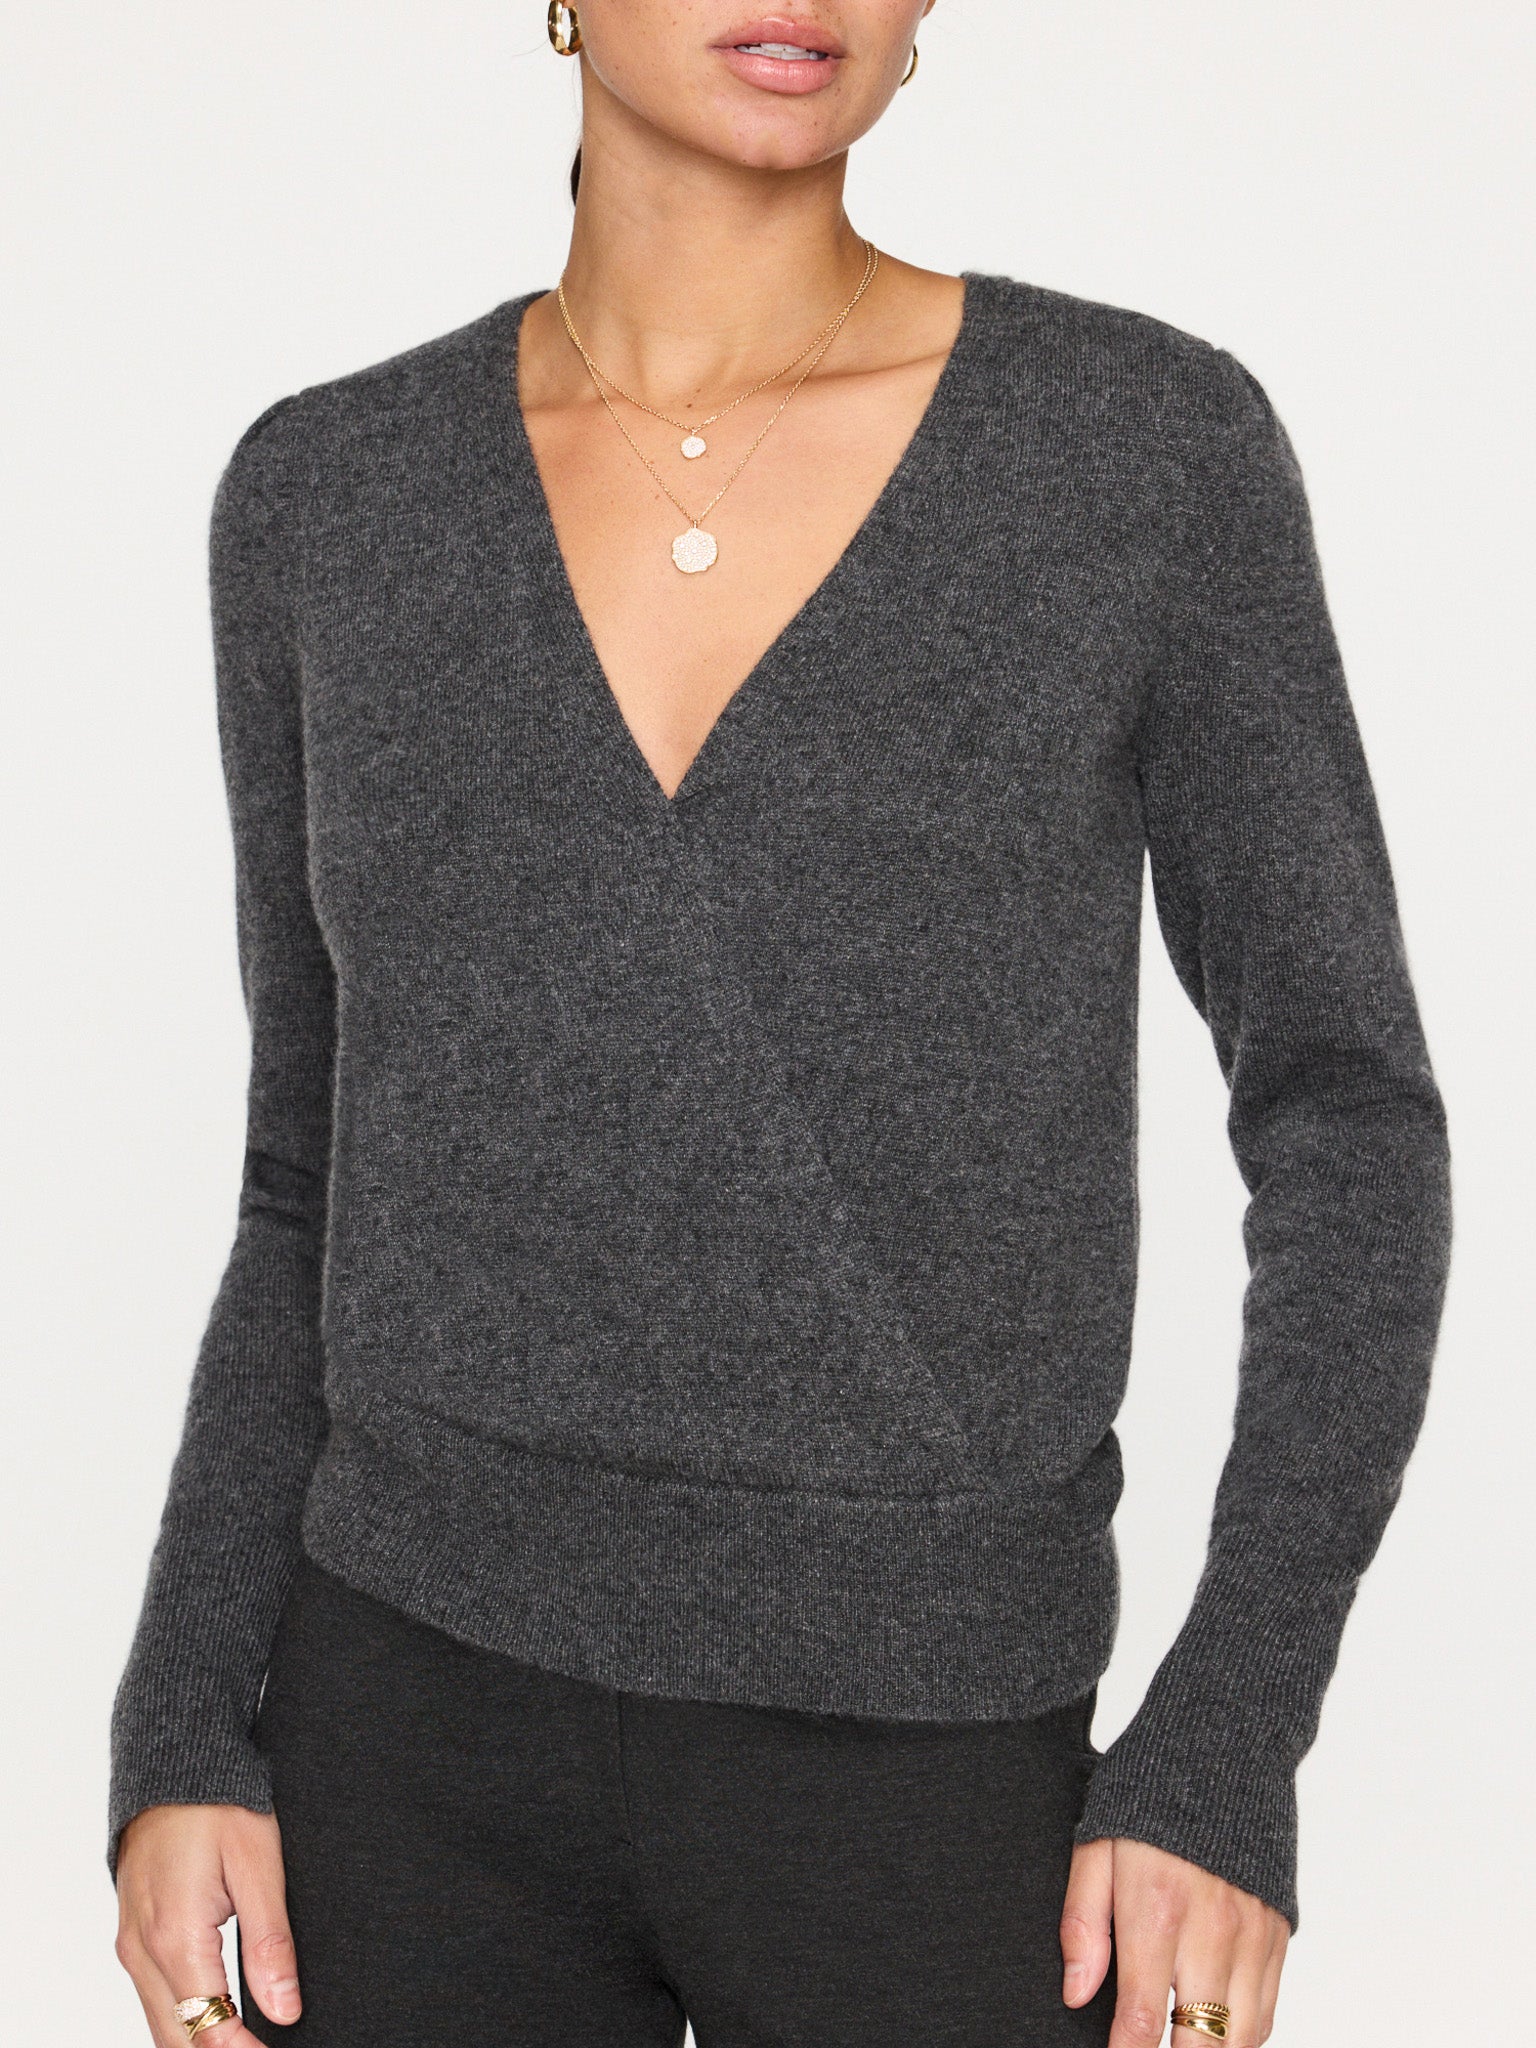 Finn cashmere v-neck gray wrap sweater front view